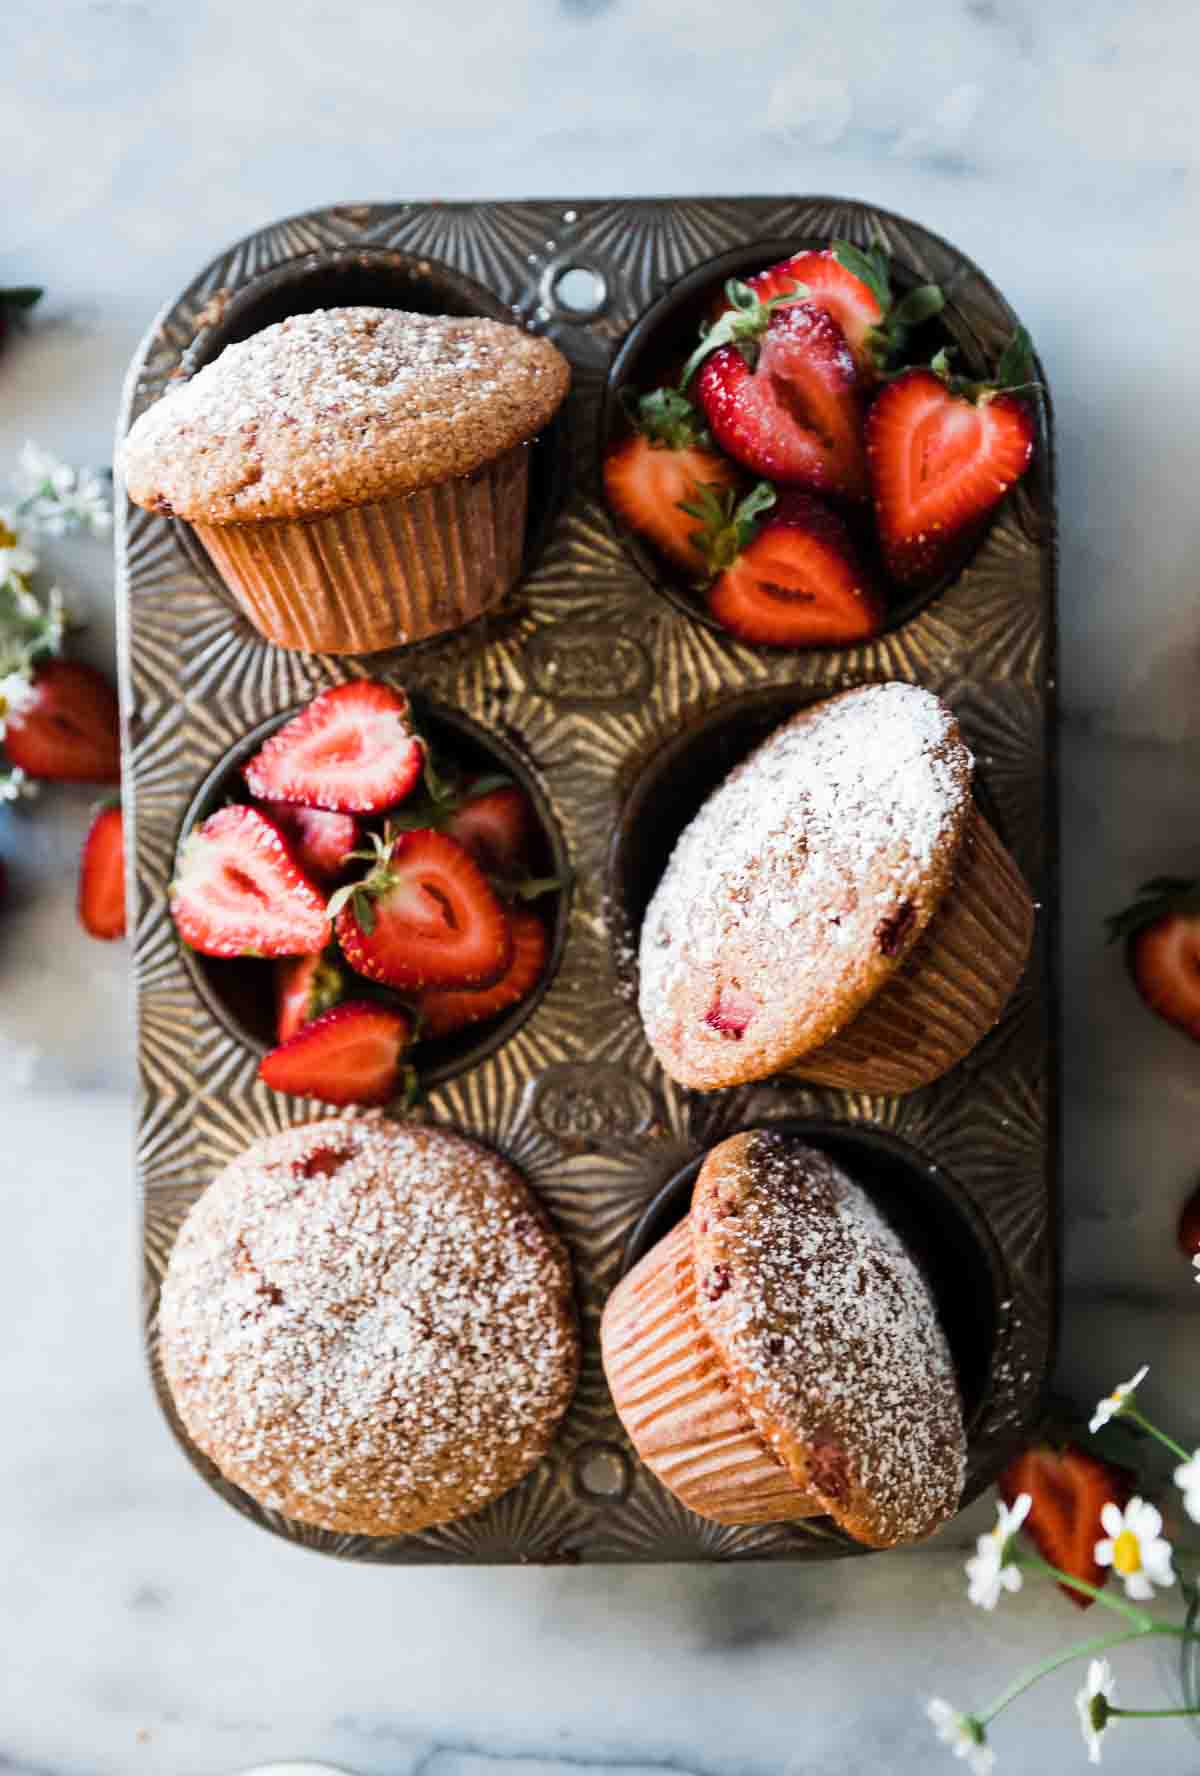 Healthy strawberry muffins in a muffin tin. There are two basins filled with strawberries.